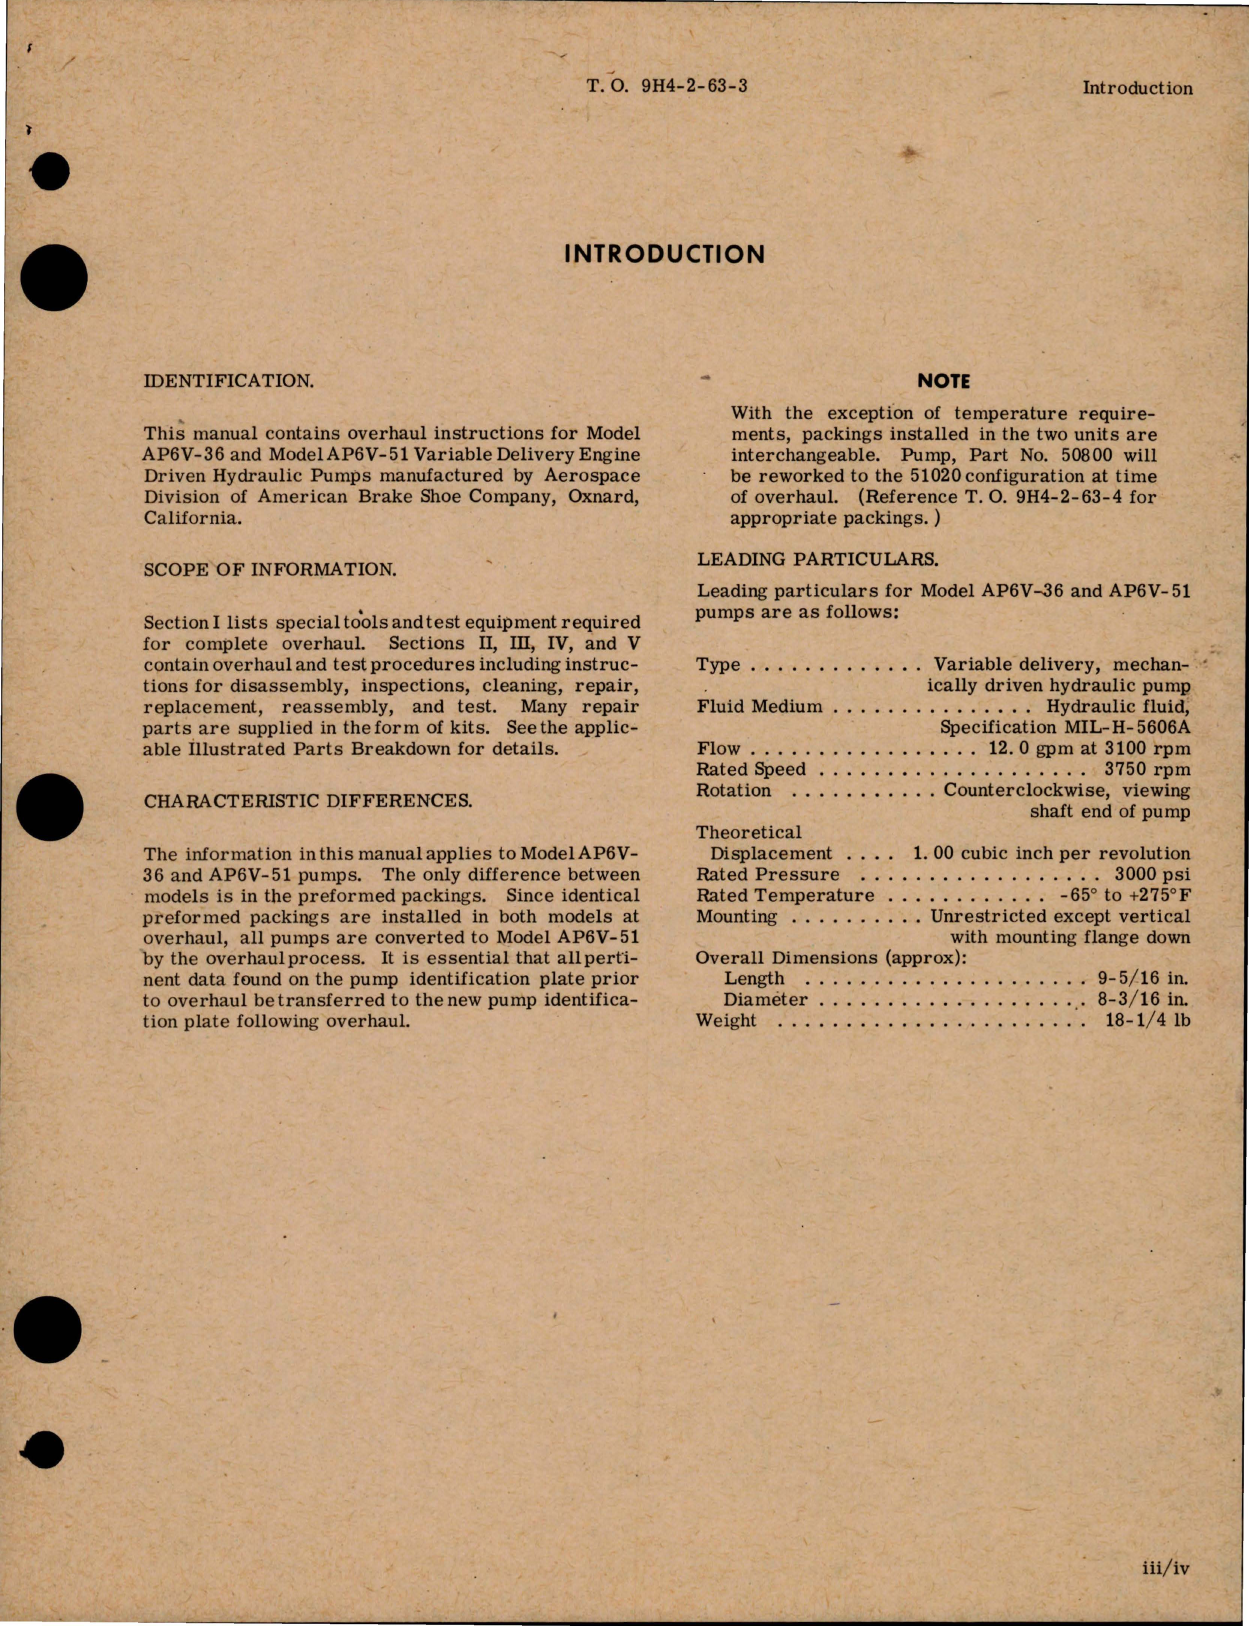 Sample page 5 from AirCorps Library document: Overhaul Instructions for Variable Delivery Engine Driven Hydraulic Pump - Parts 50800 and 51020